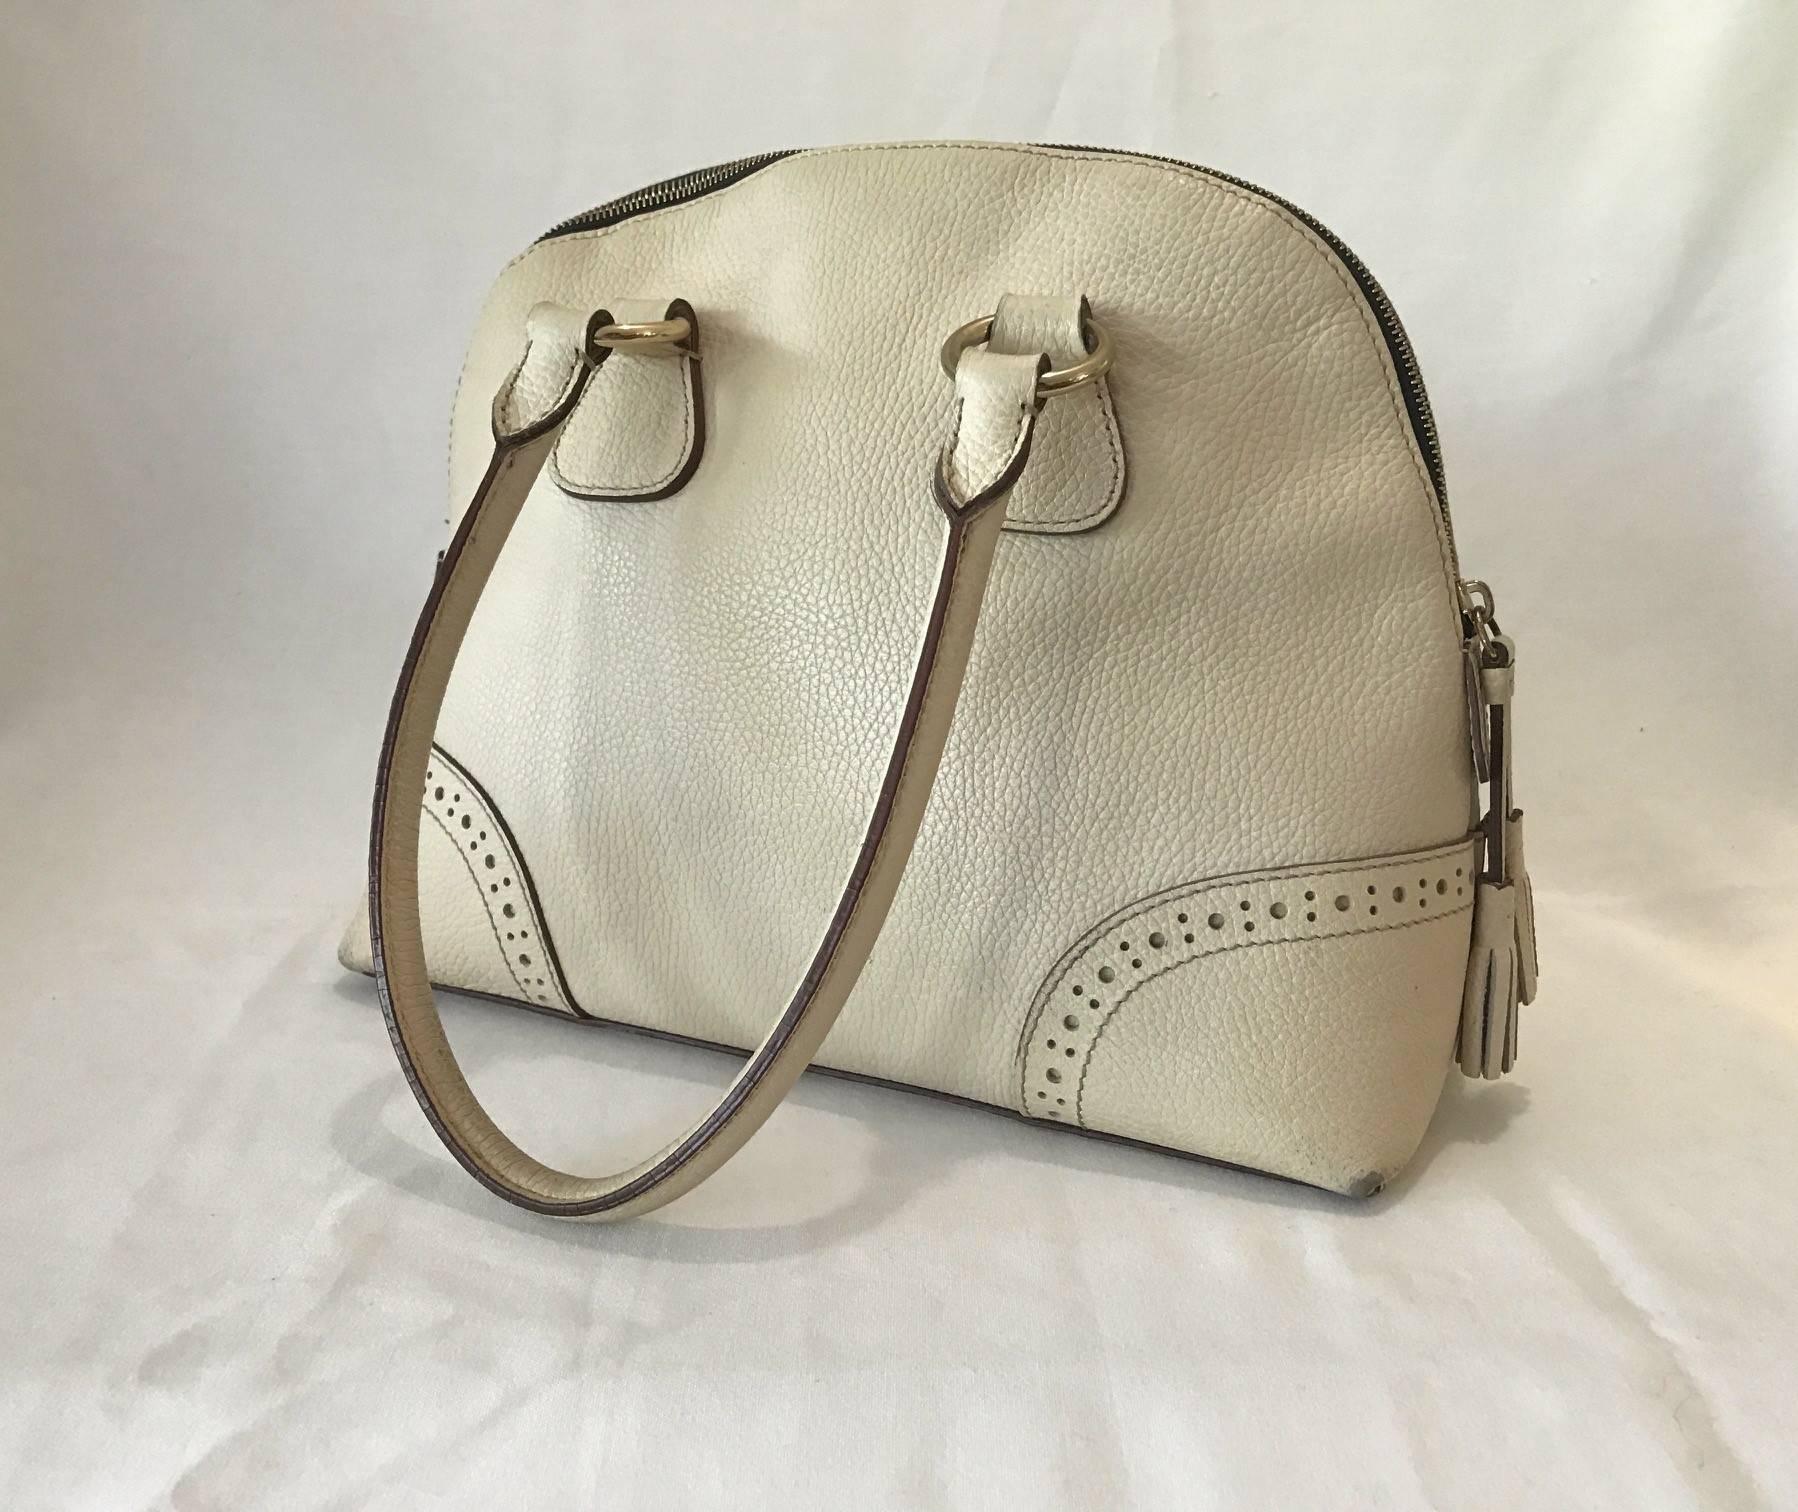 Authentic Creme Colored Dooney Bourke Leather Hand Bag, Clean, Rarely Used In Excellent Condition For Sale In Westport, CT